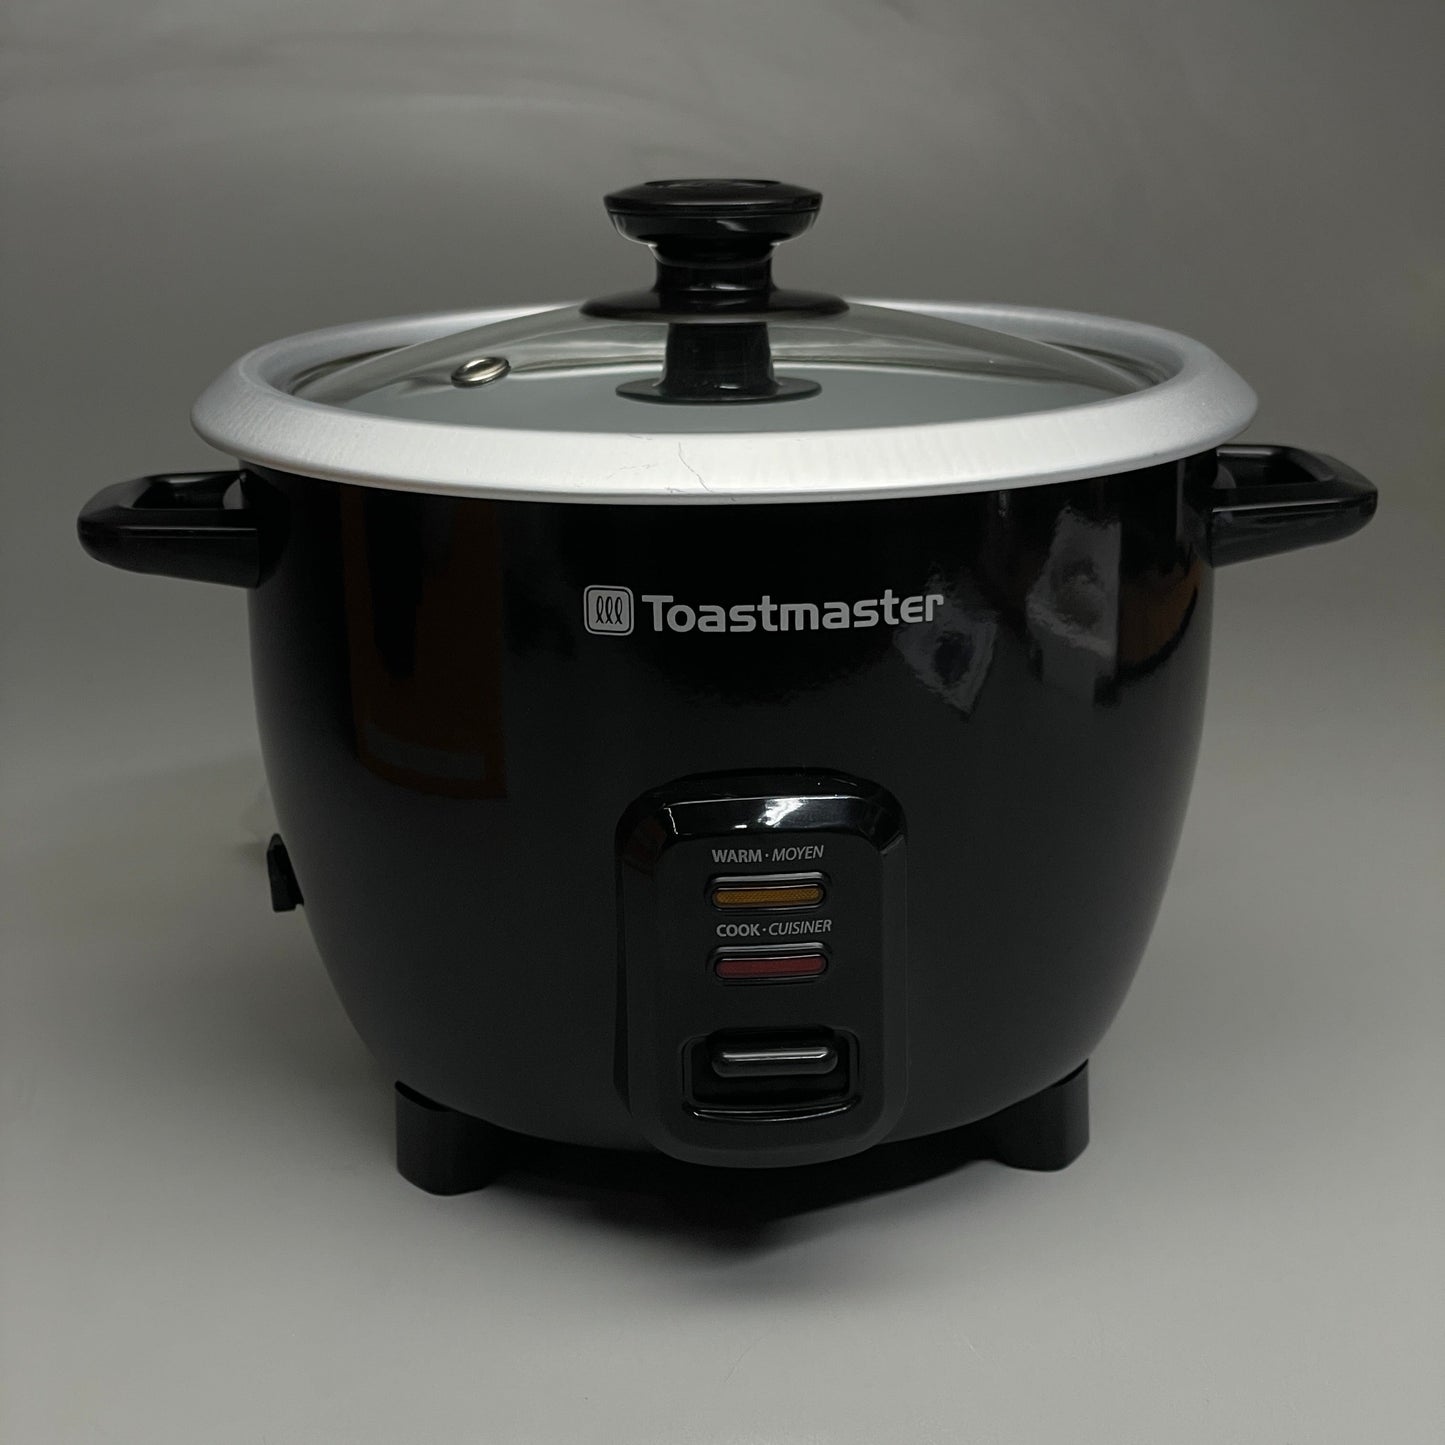 Toastmaster 10-Cup Electric Rice Cooker (5 cups uncooked), Black, TM-101RCCN